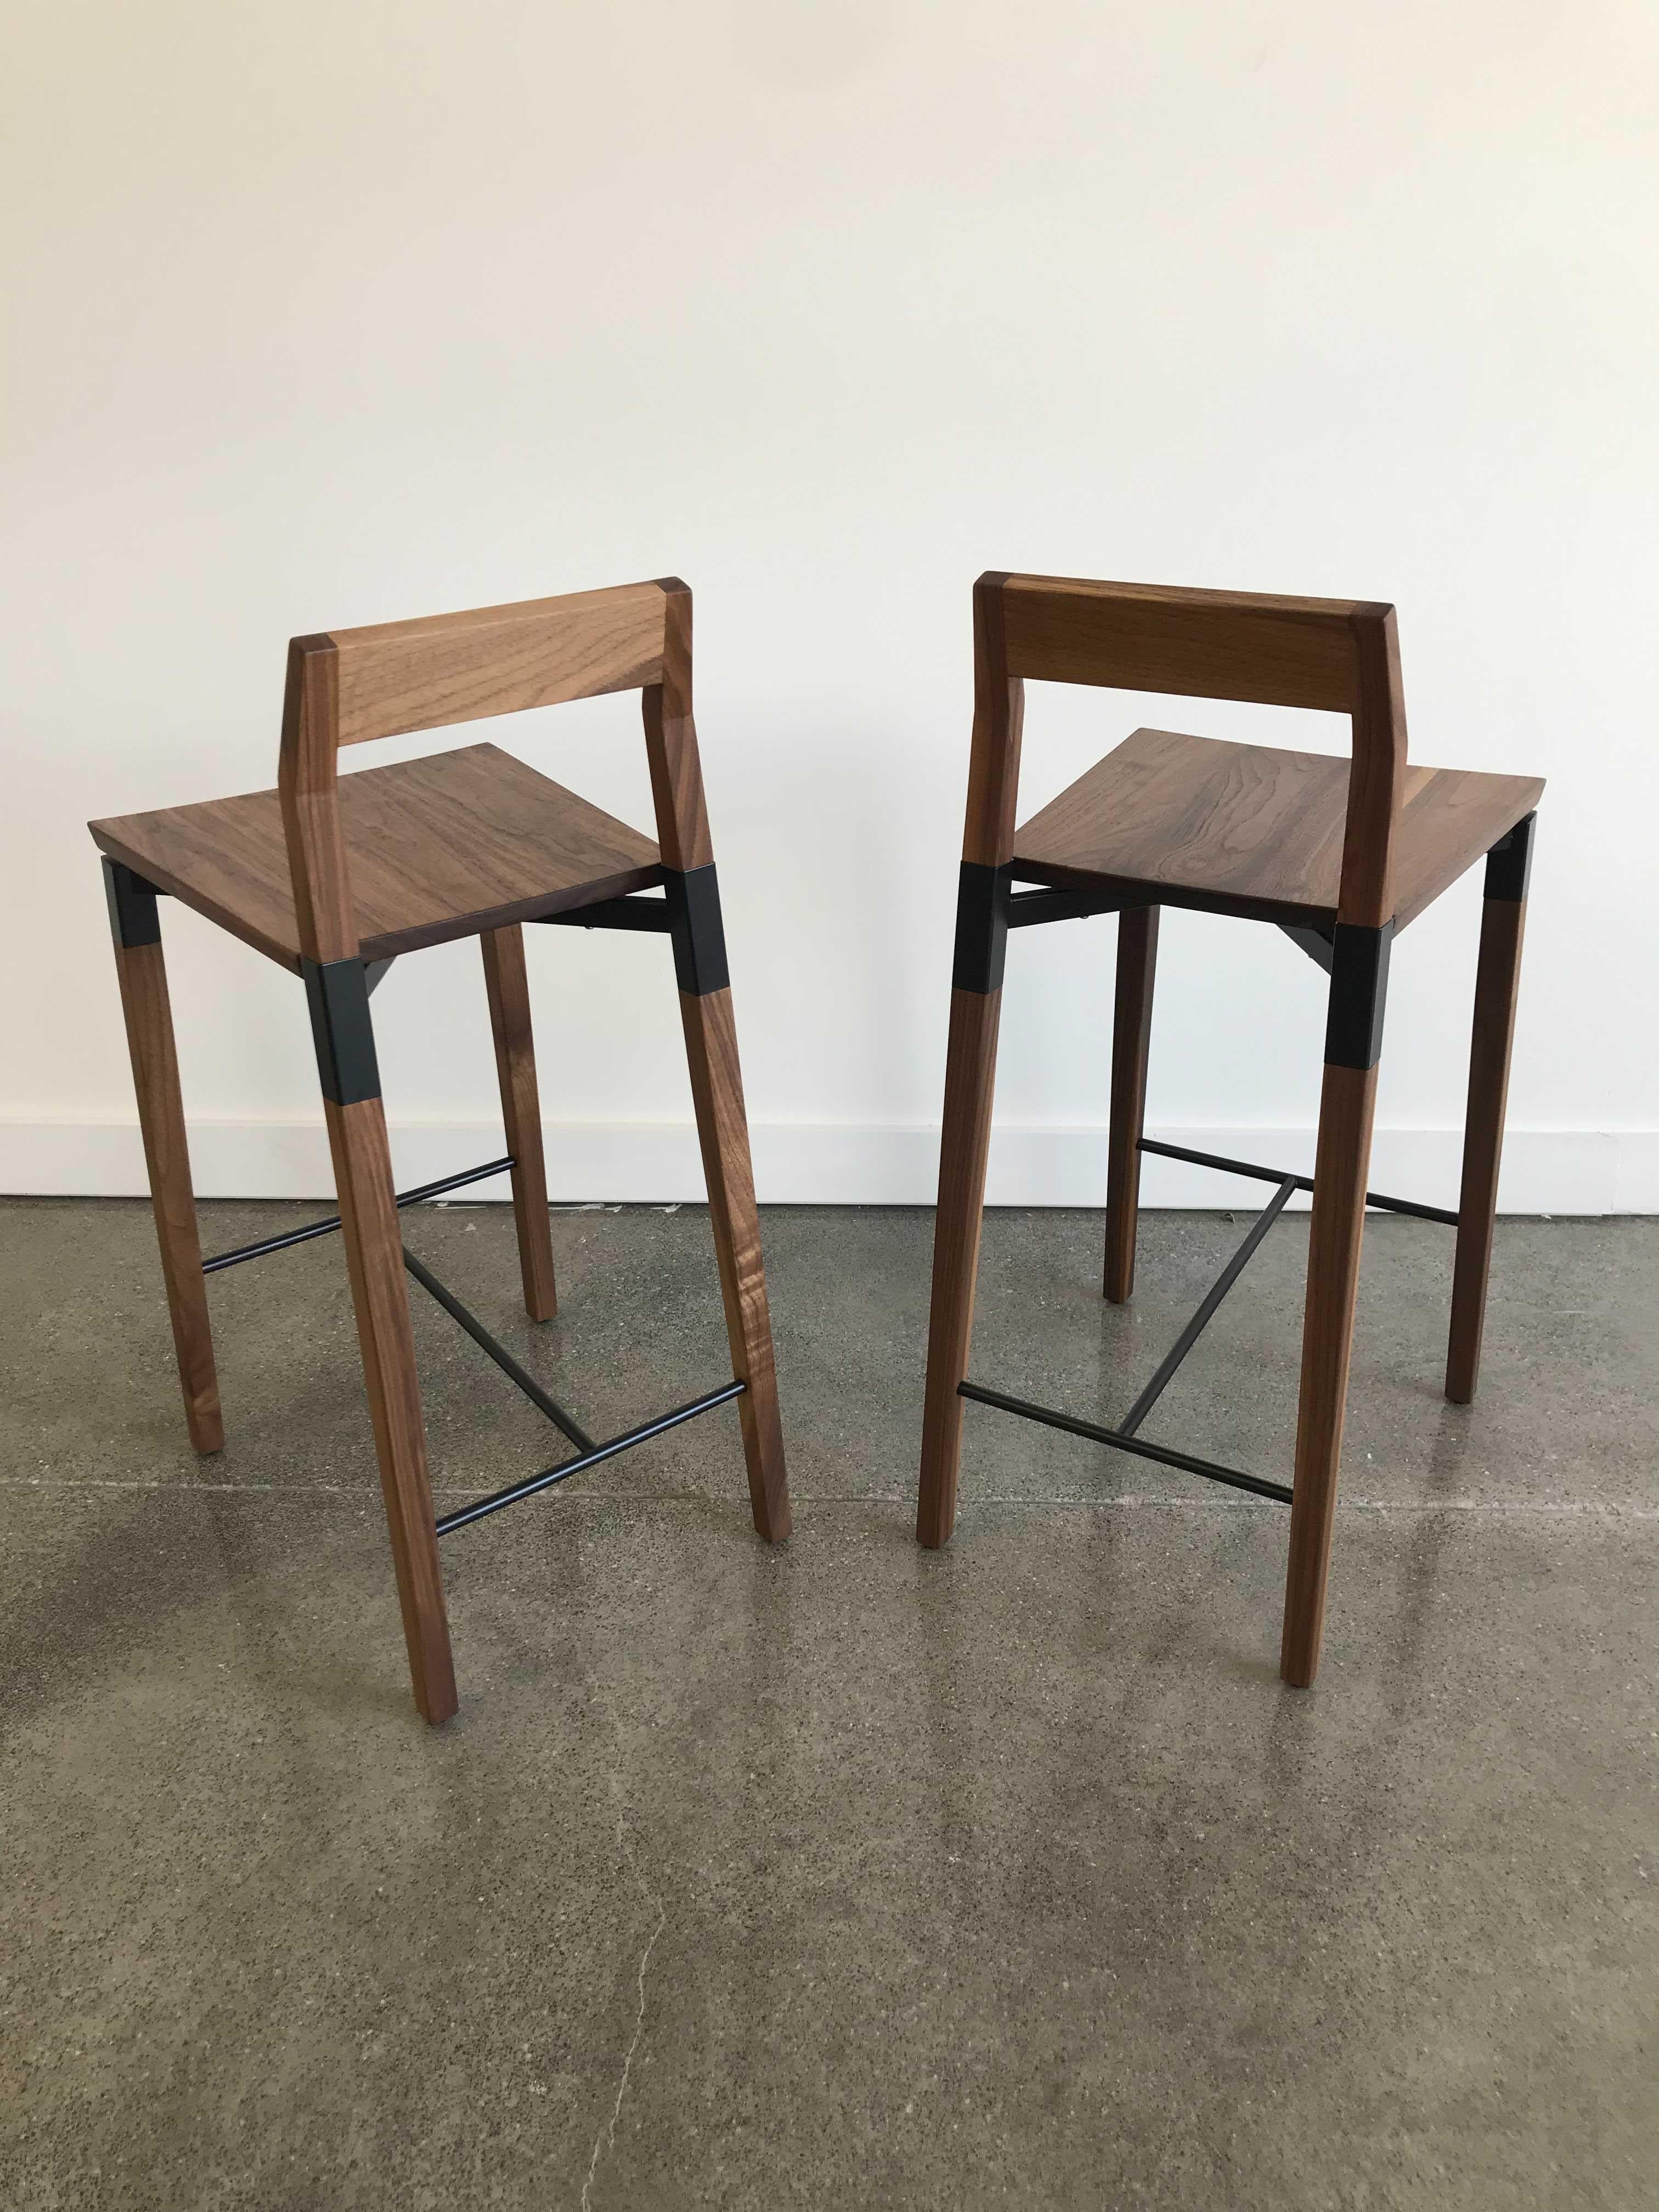 Canadian Walnut Parkdale Stool Counter by Hollis & Morris